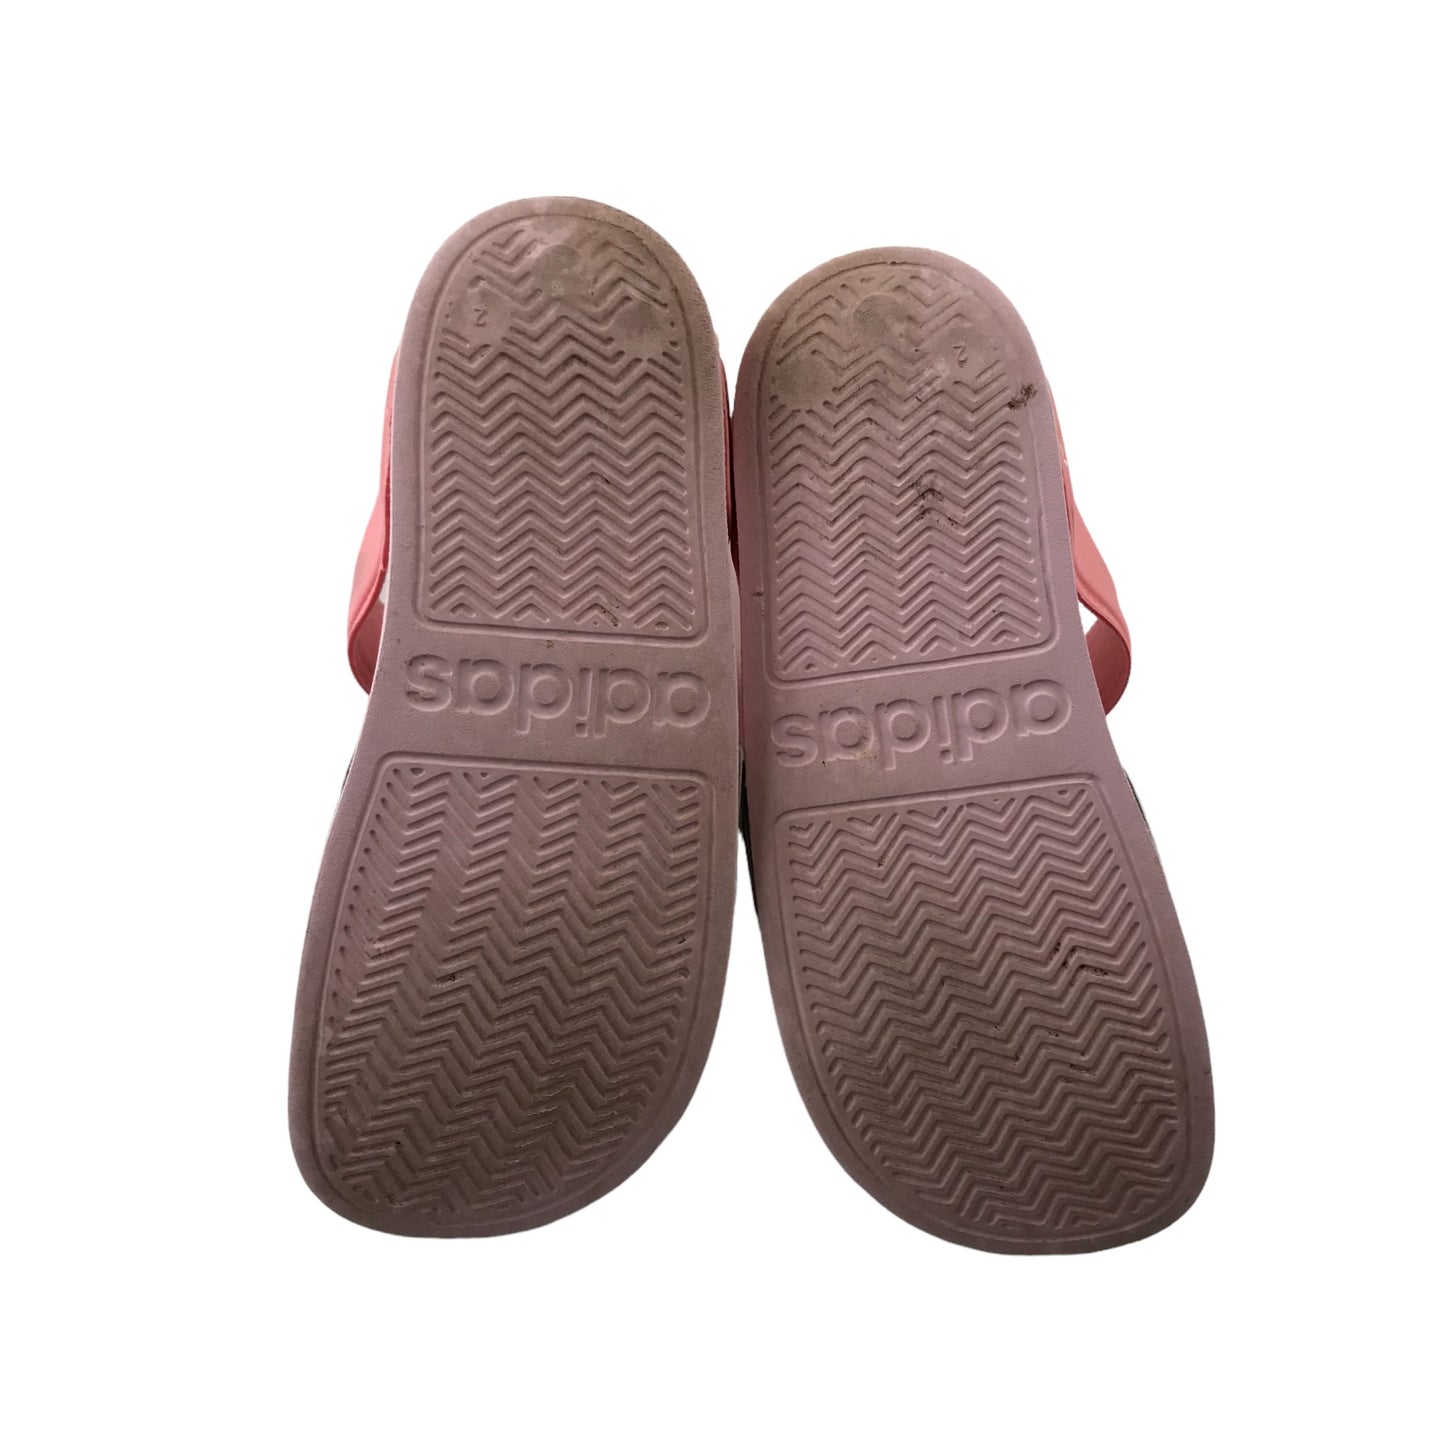 Adidas Sandals Shoe Size 2 Pink and Grey Foamy with Straps